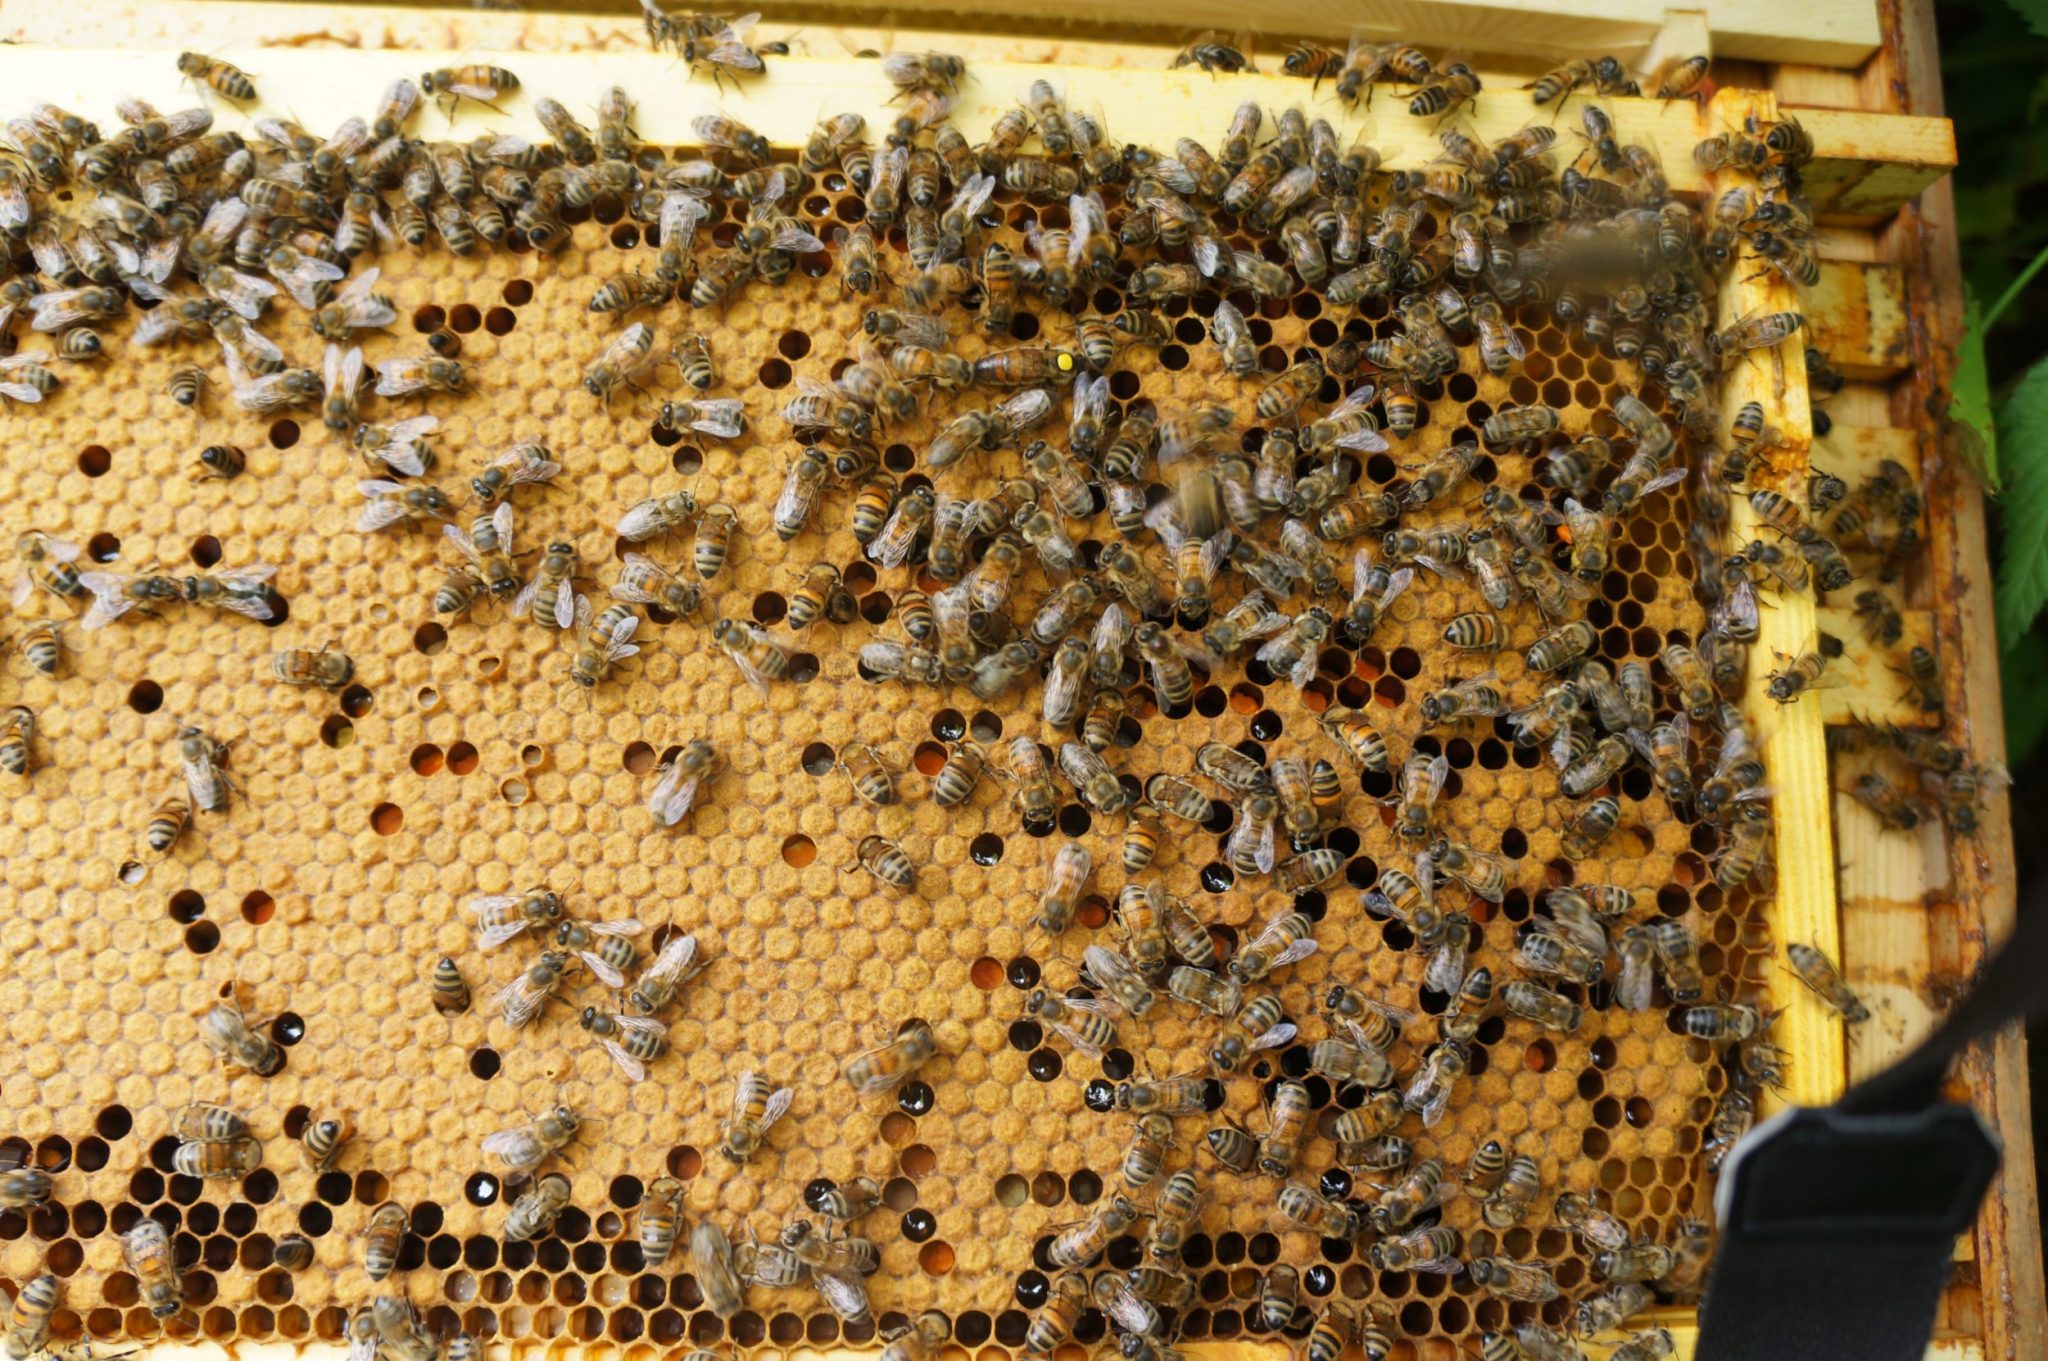 August '18 A well laid frame of brood. You can see the quenn near the top of the frame